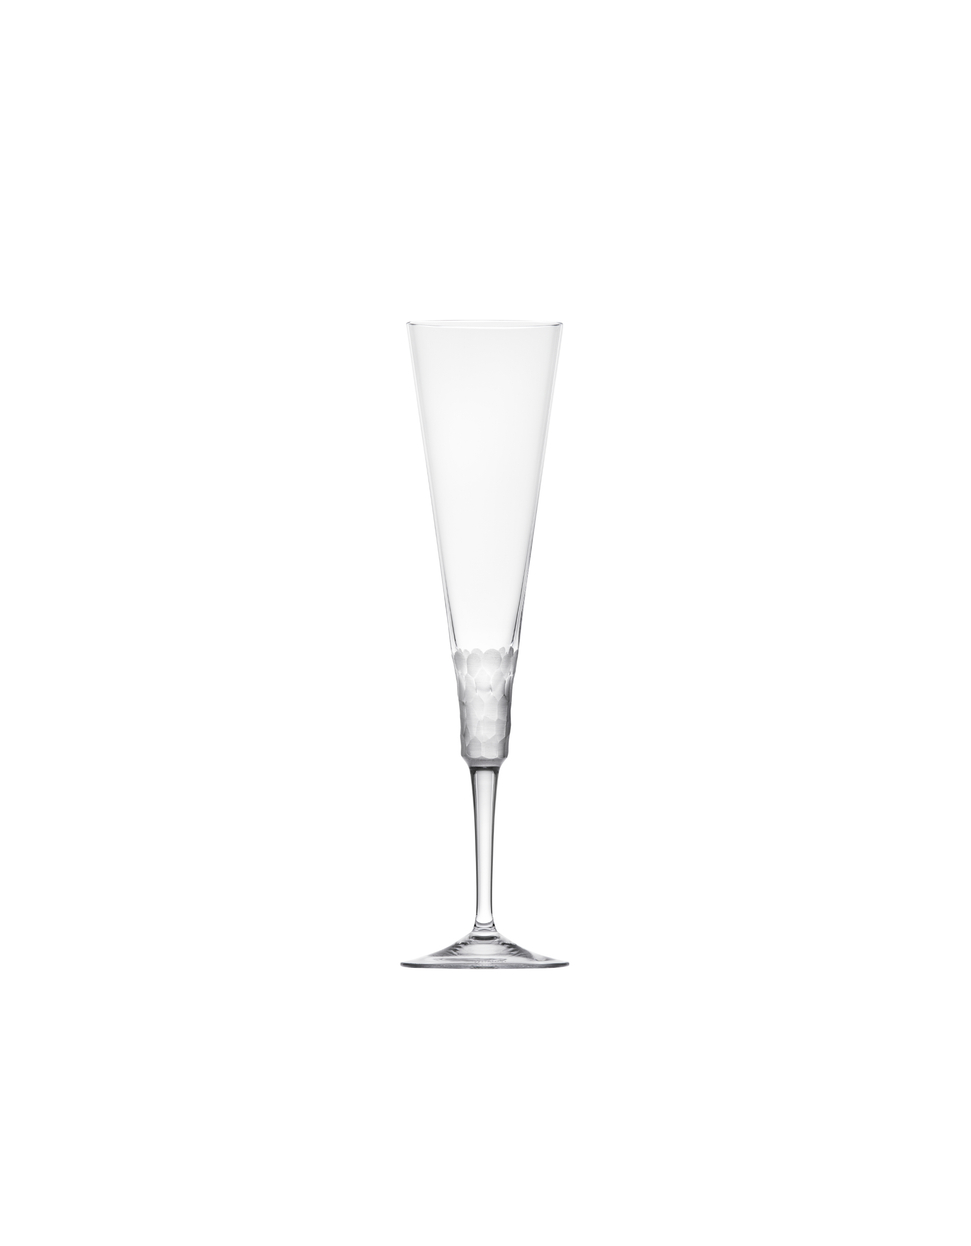 Champagne flute glass 170 ml from the Fluent collection